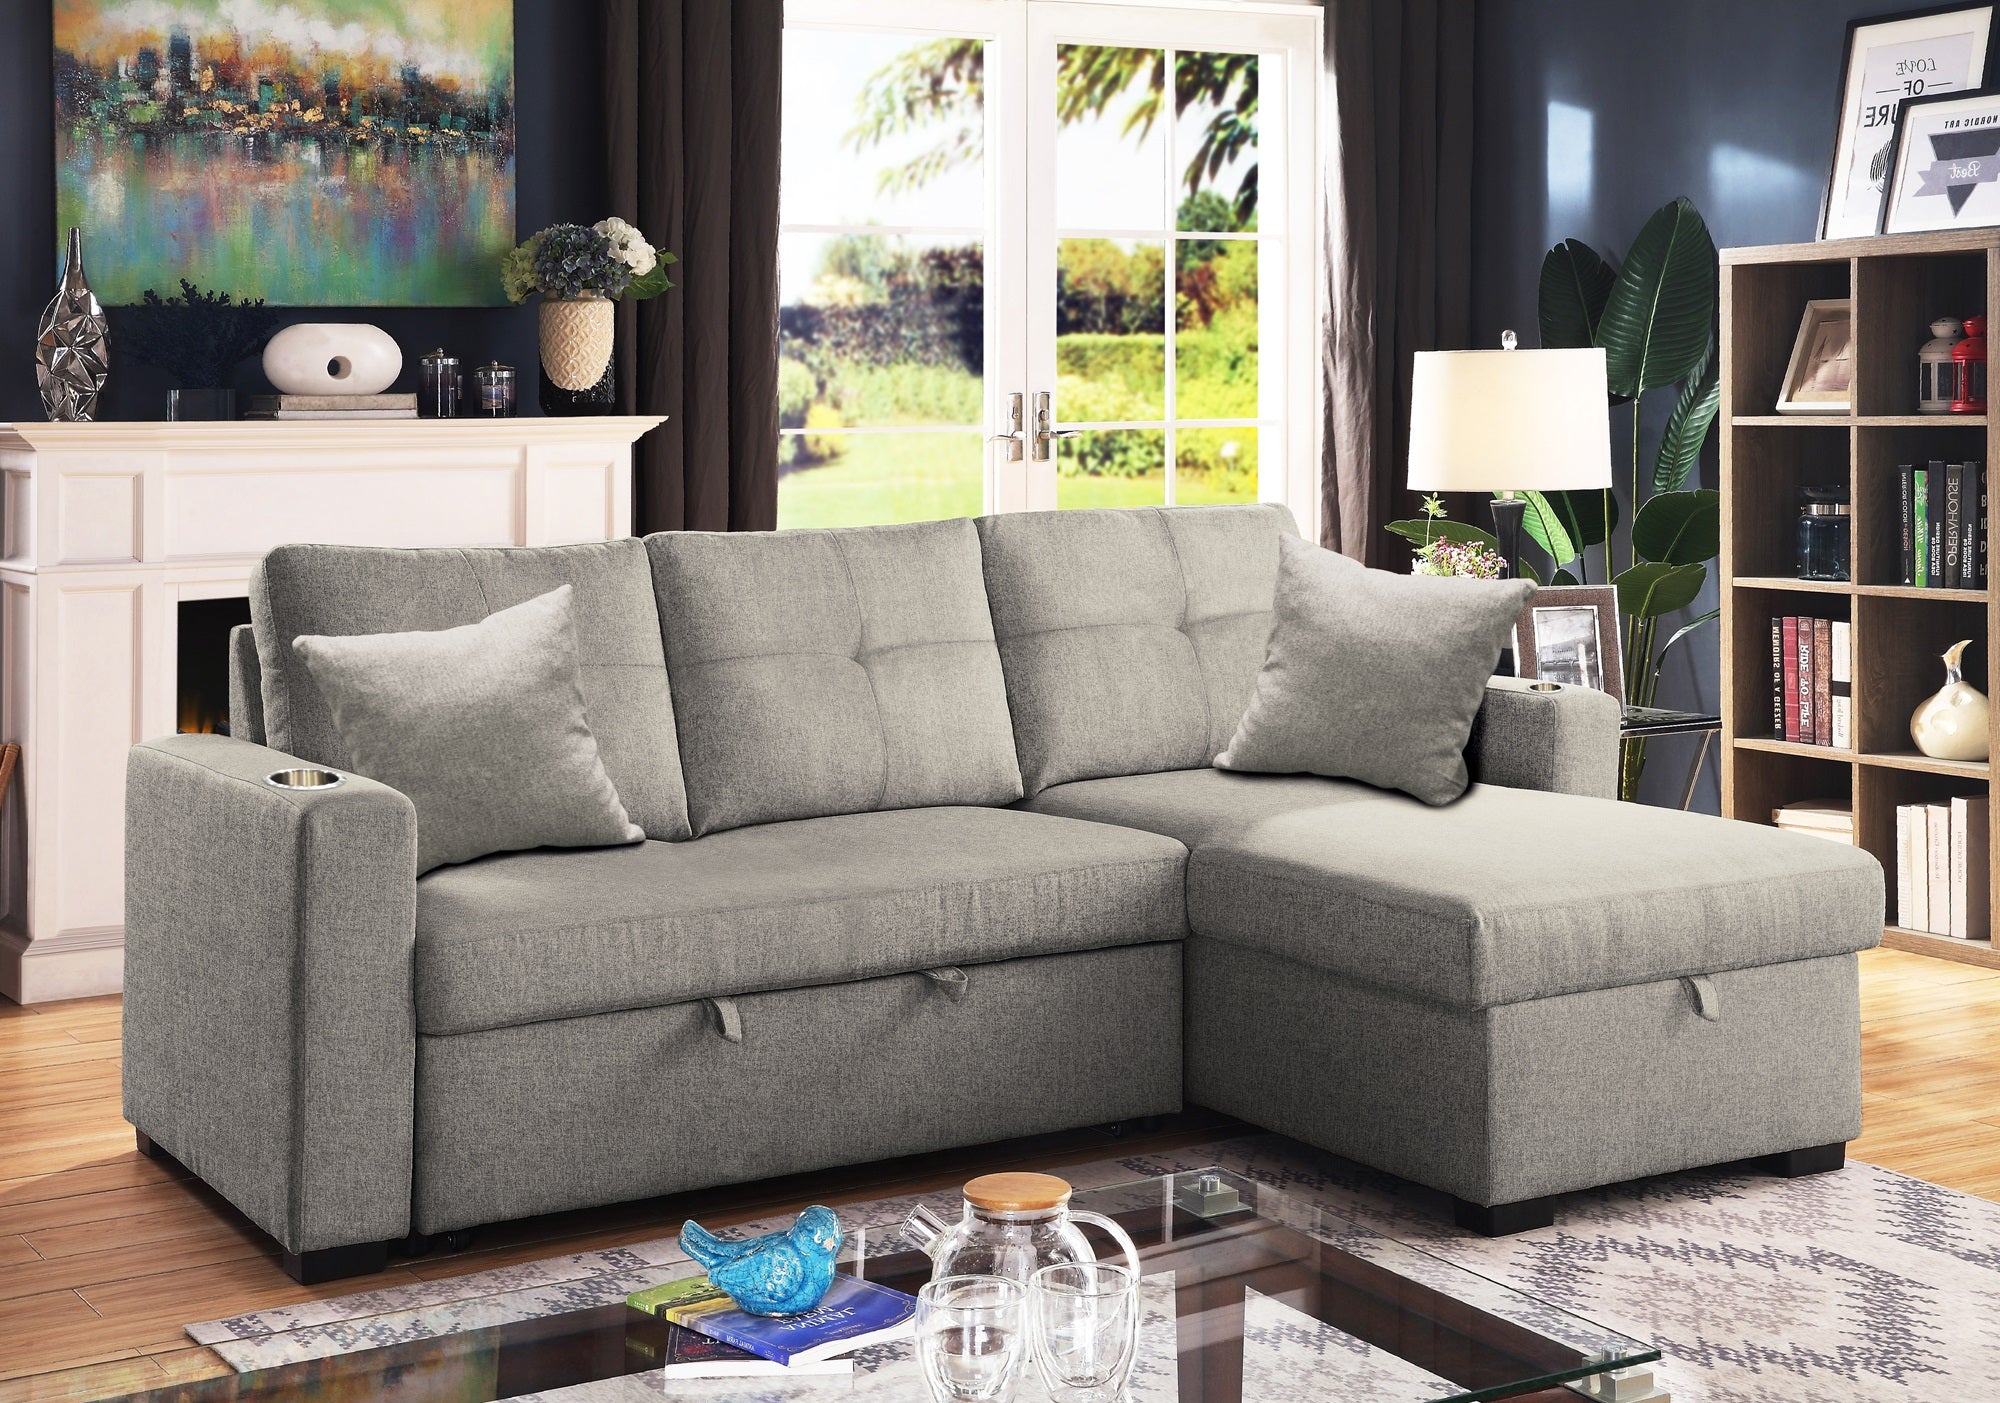  Samson 3-seater fabric sofa bed with chaise lounge in a living room setting.